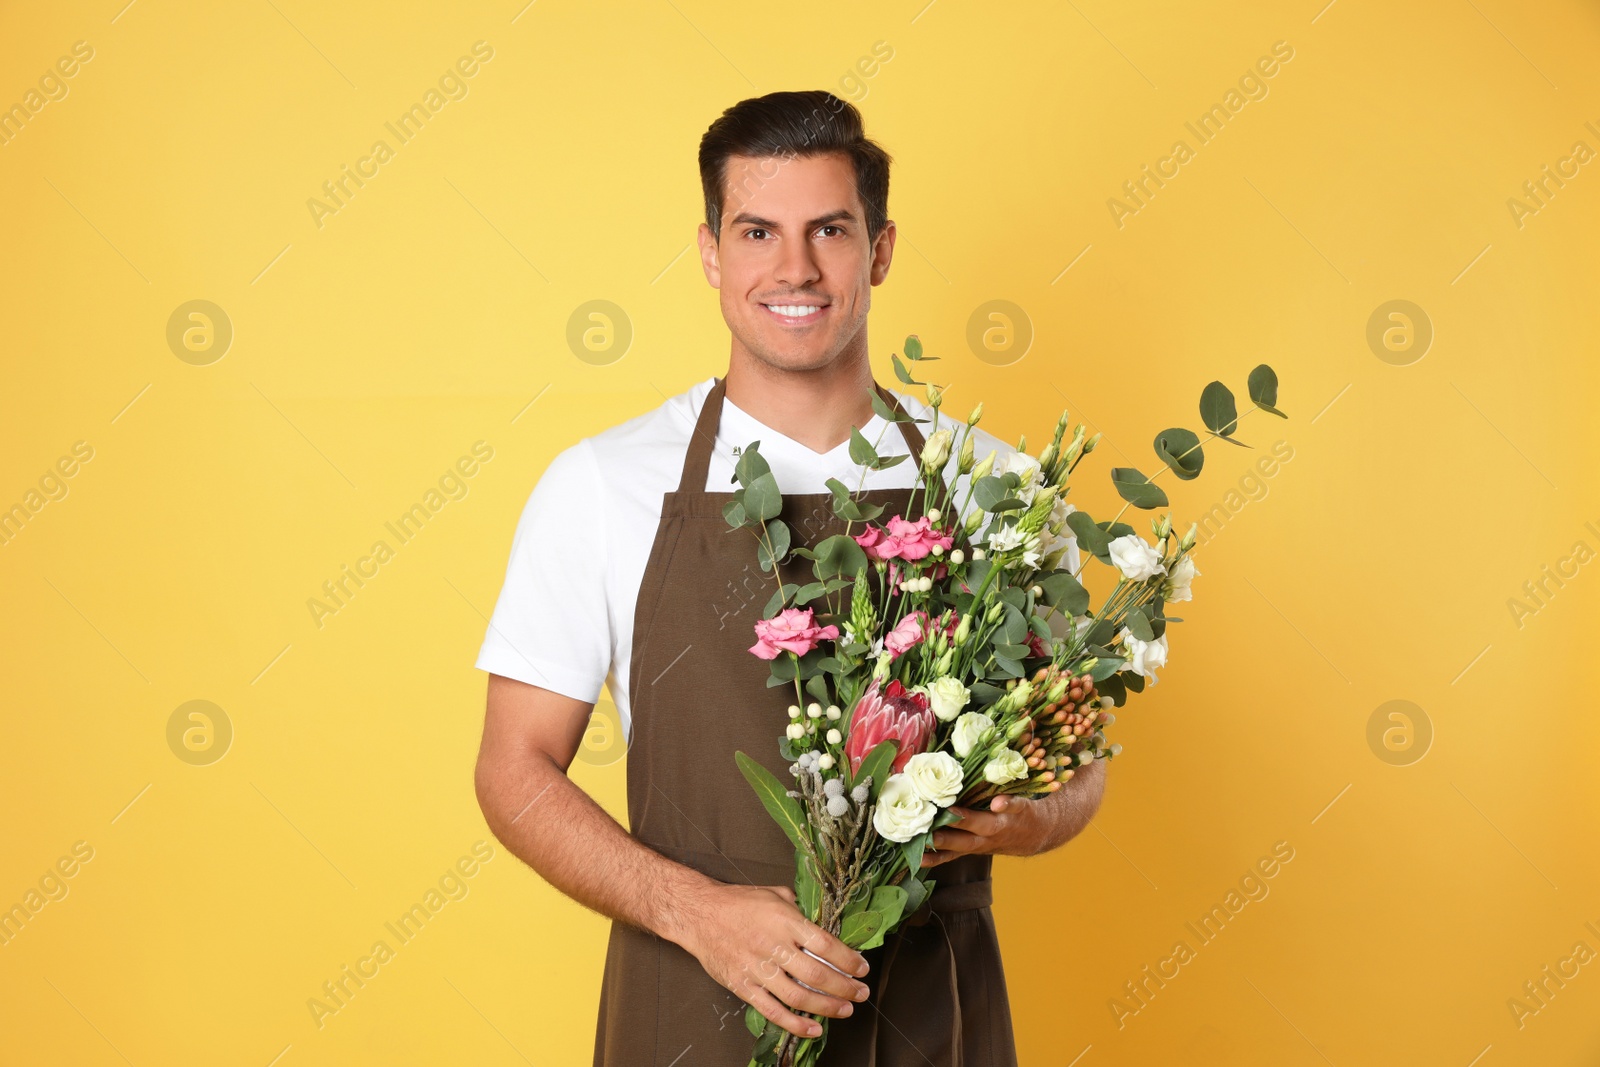 Photo of Florist with beautiful bouquet on yellow background